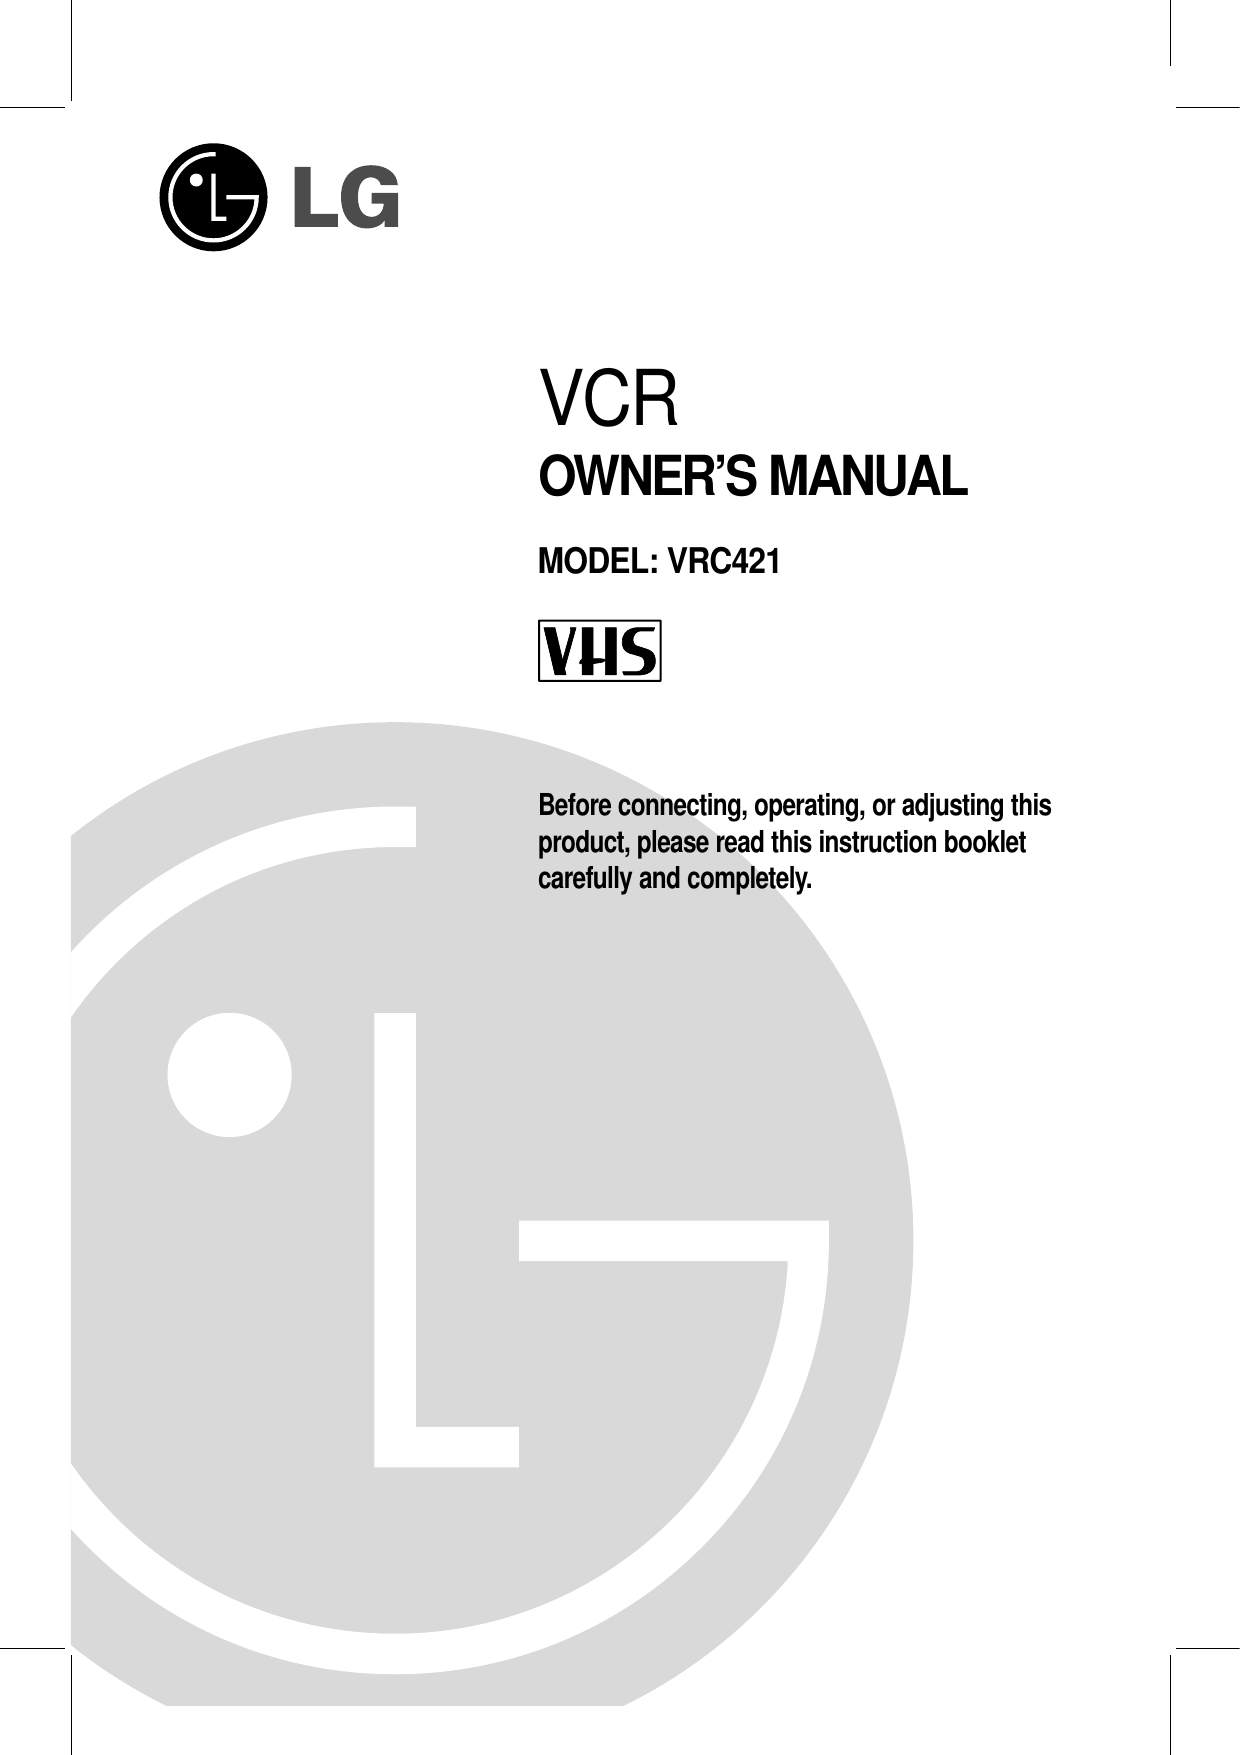 VCROWNER’S MANUALMODEL: VRC421Before connecting, operating, or adjusting thisproduct, please read this instruction booklet carefully and completely.